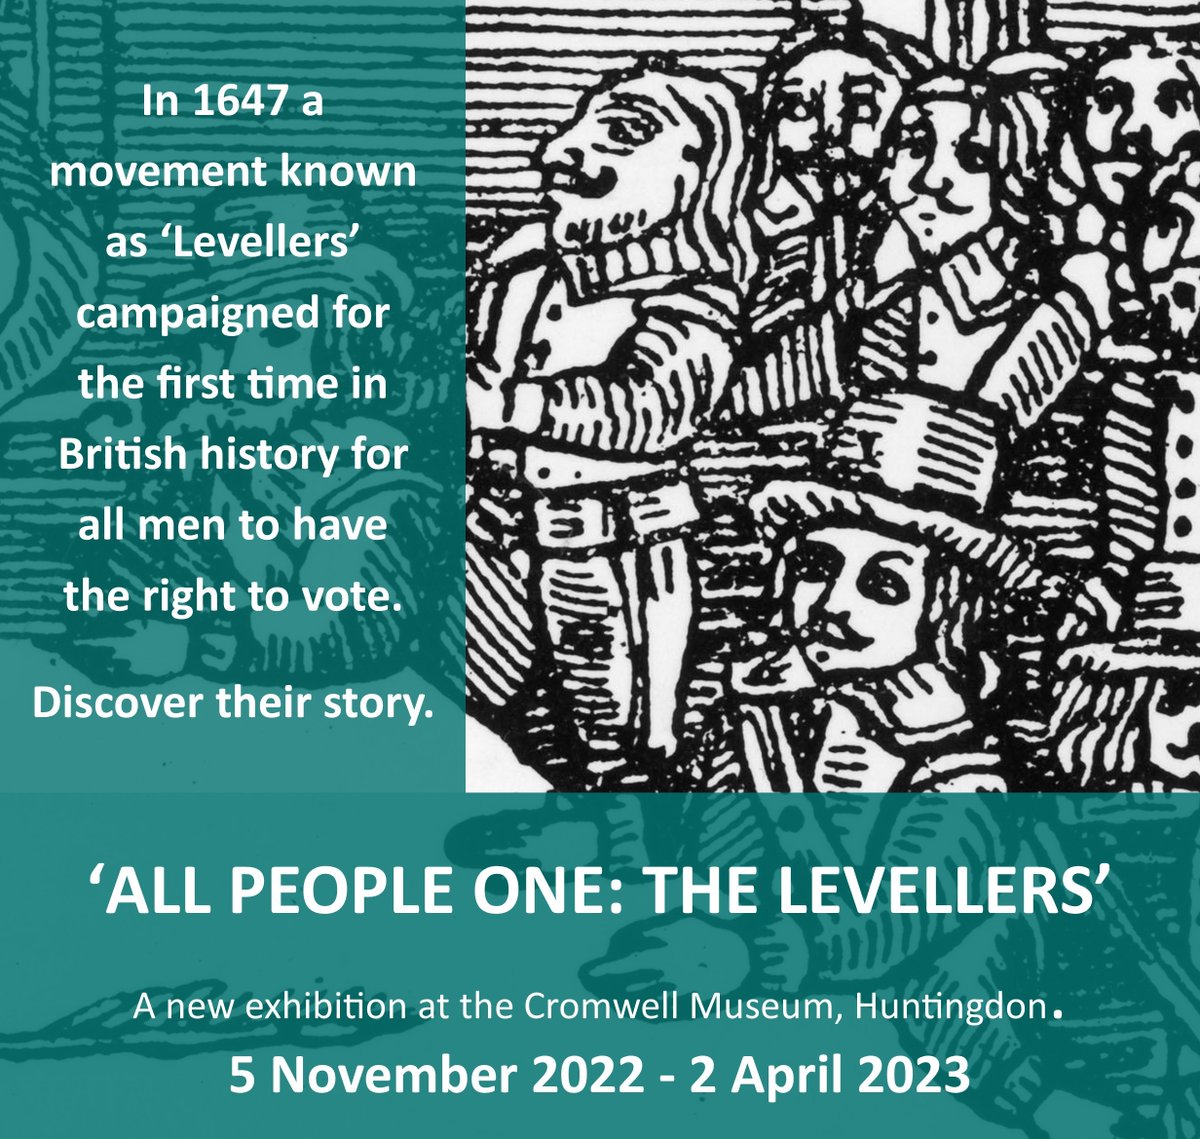 For the 375th anniversary of the Putney Debates, our next exhibit will be on the Leveller movement and the Debates - opening on 5 November. More details at: cromwellmuseum.org/events/all-peo… 3/3